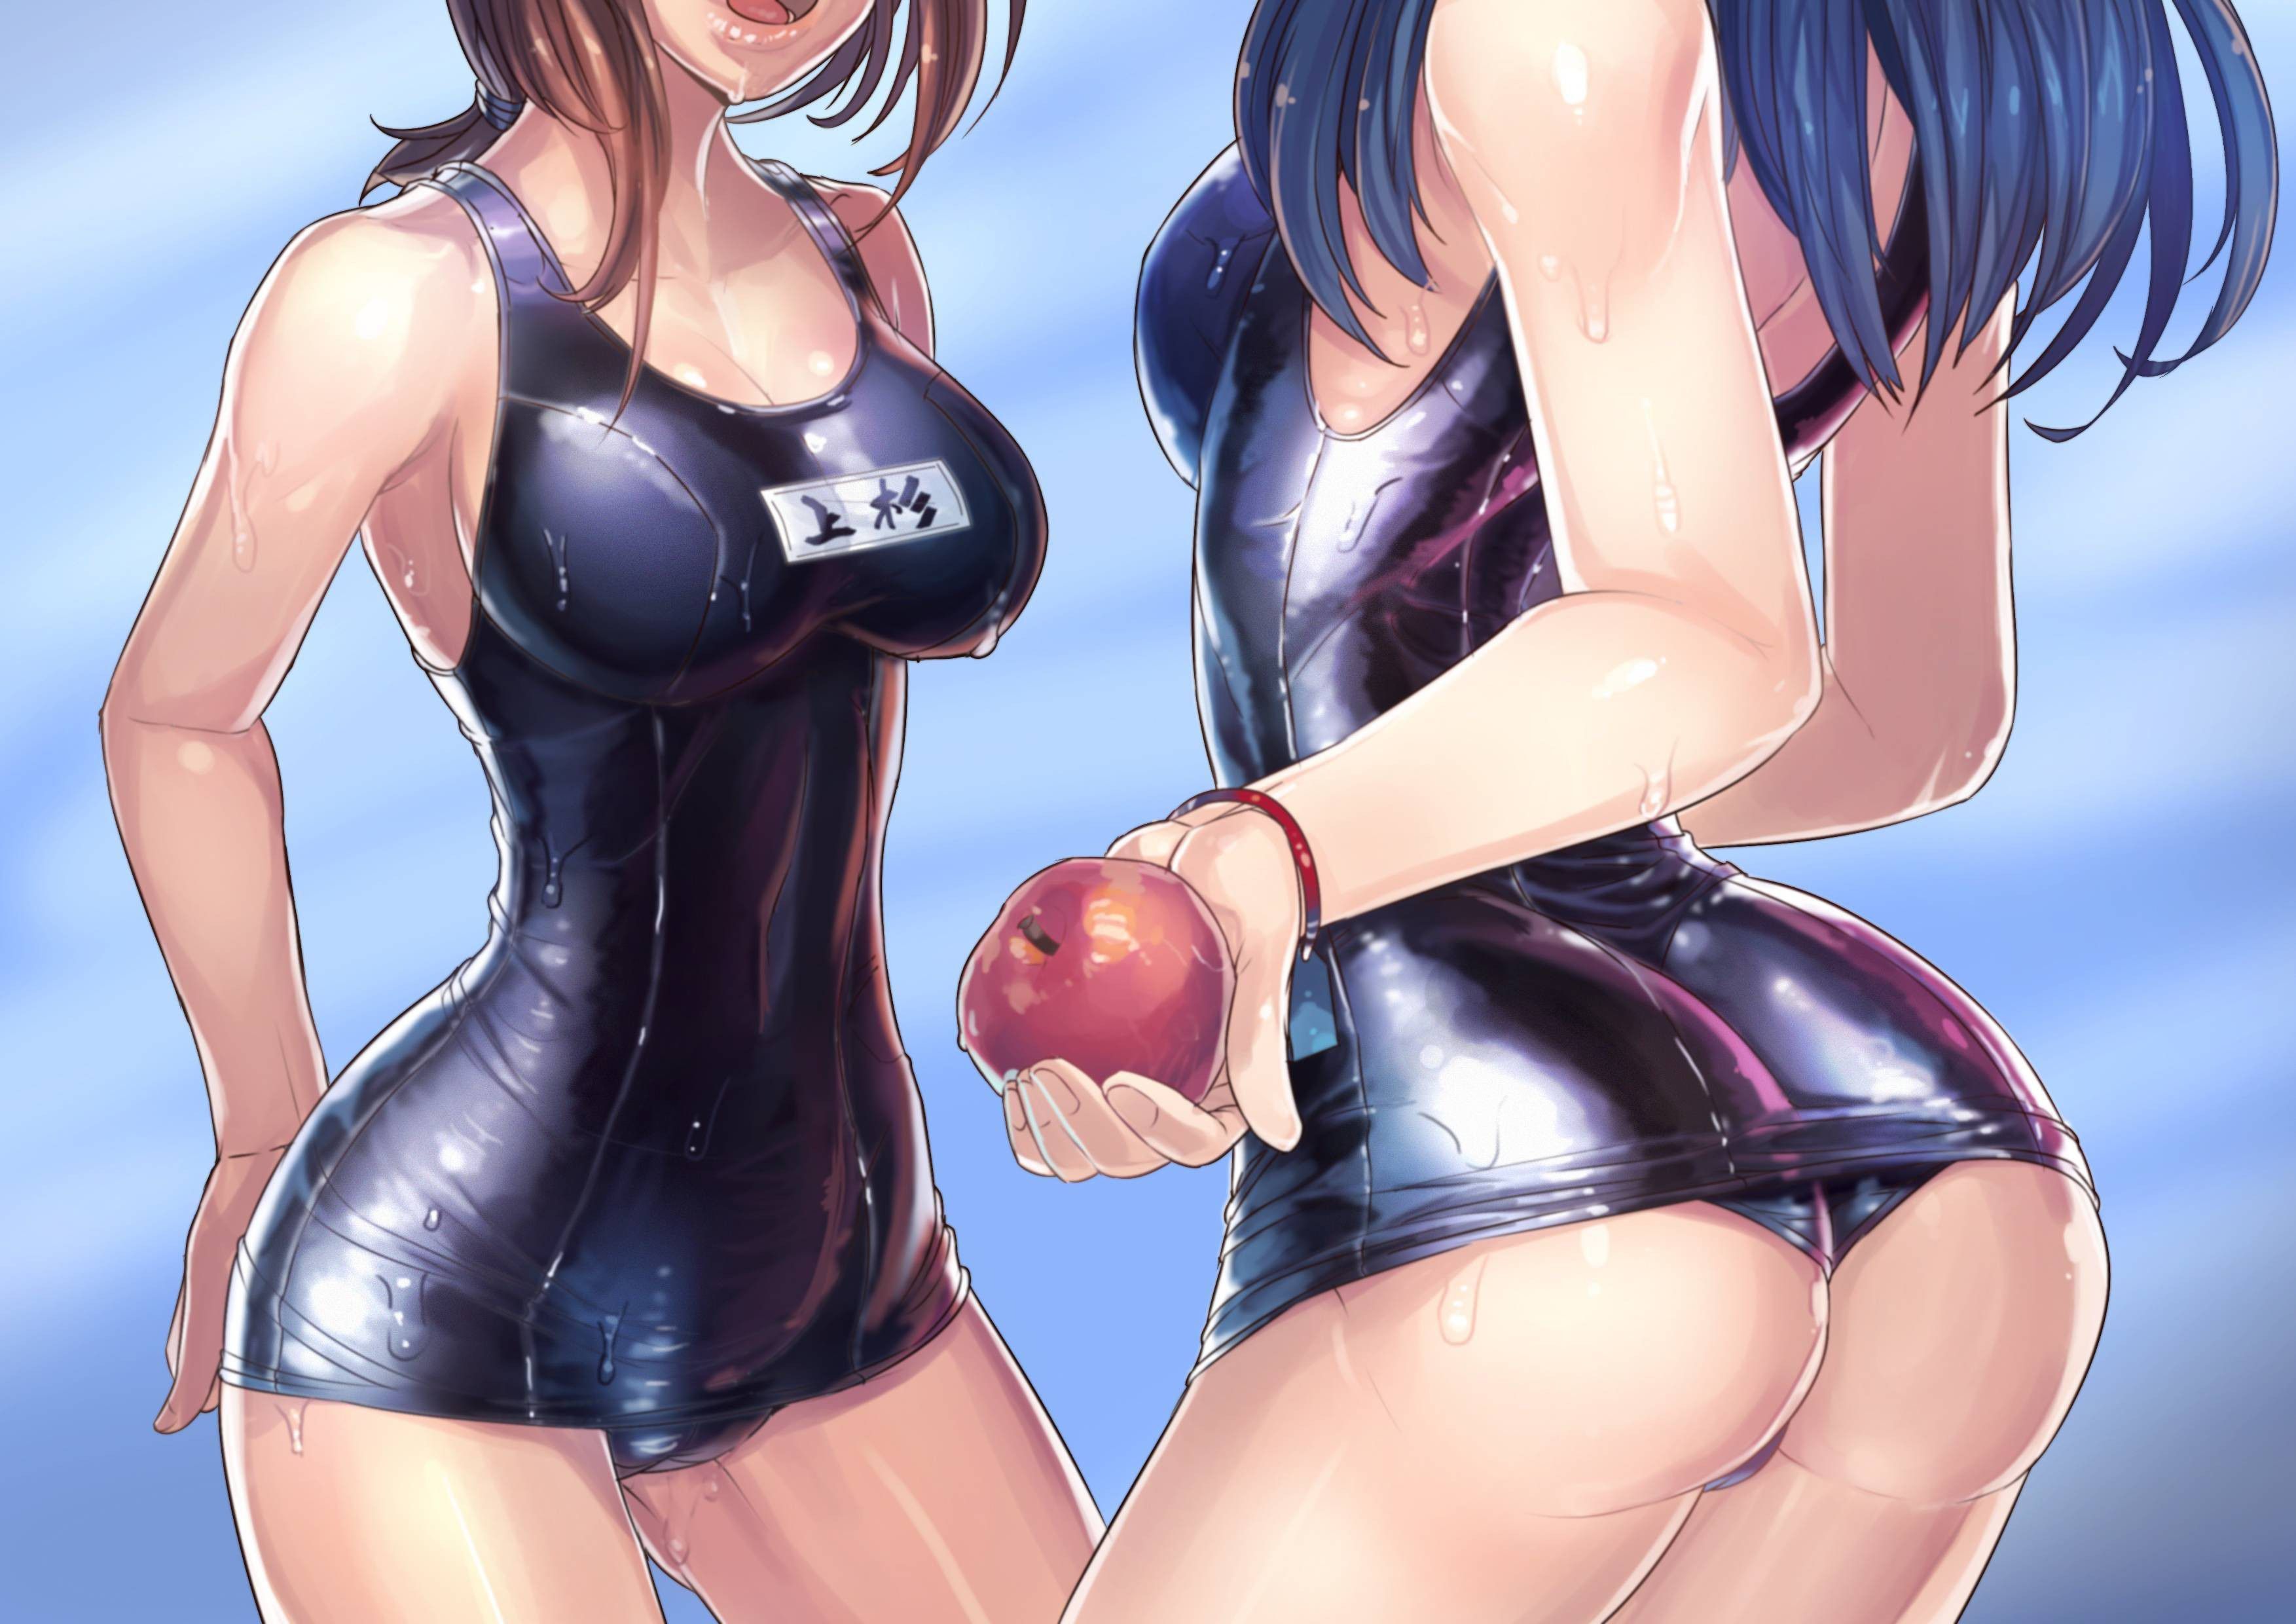 [2nd] Second erotic image of a cute girl in the school swimsuit part 28 [swimsuit] 13